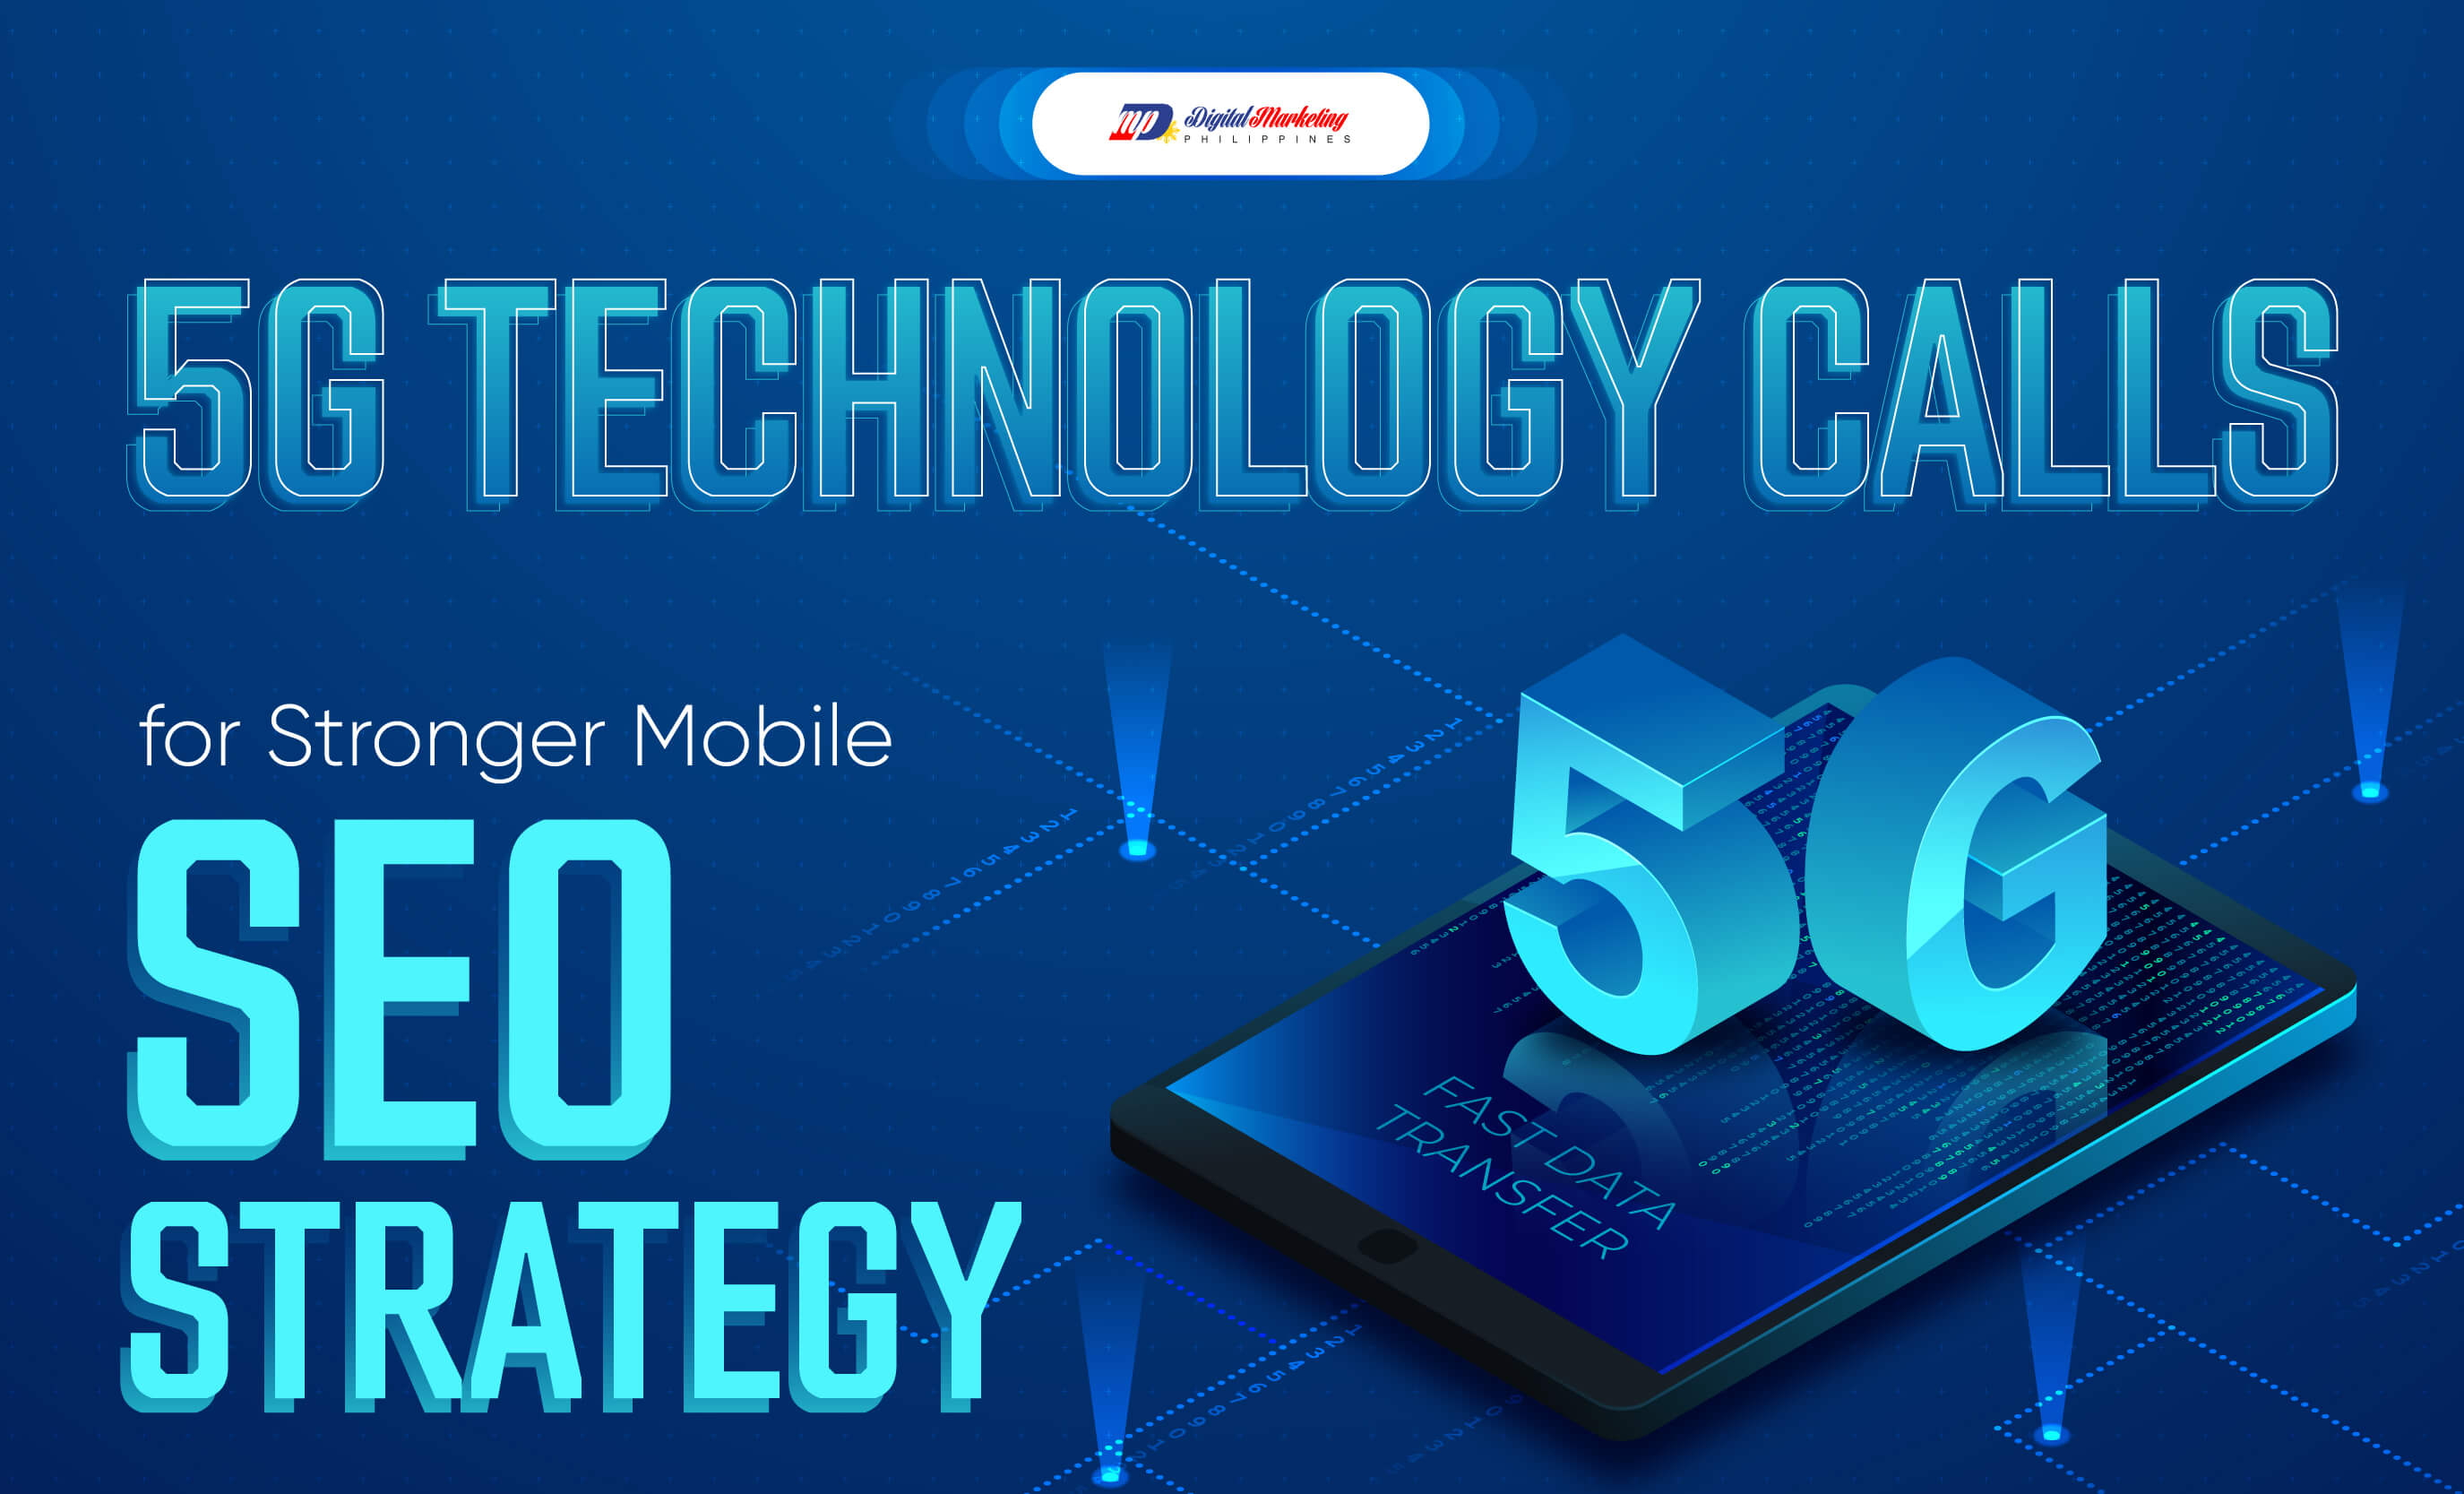 5G Technology Calls for Stronger Mobile SEO Strategy